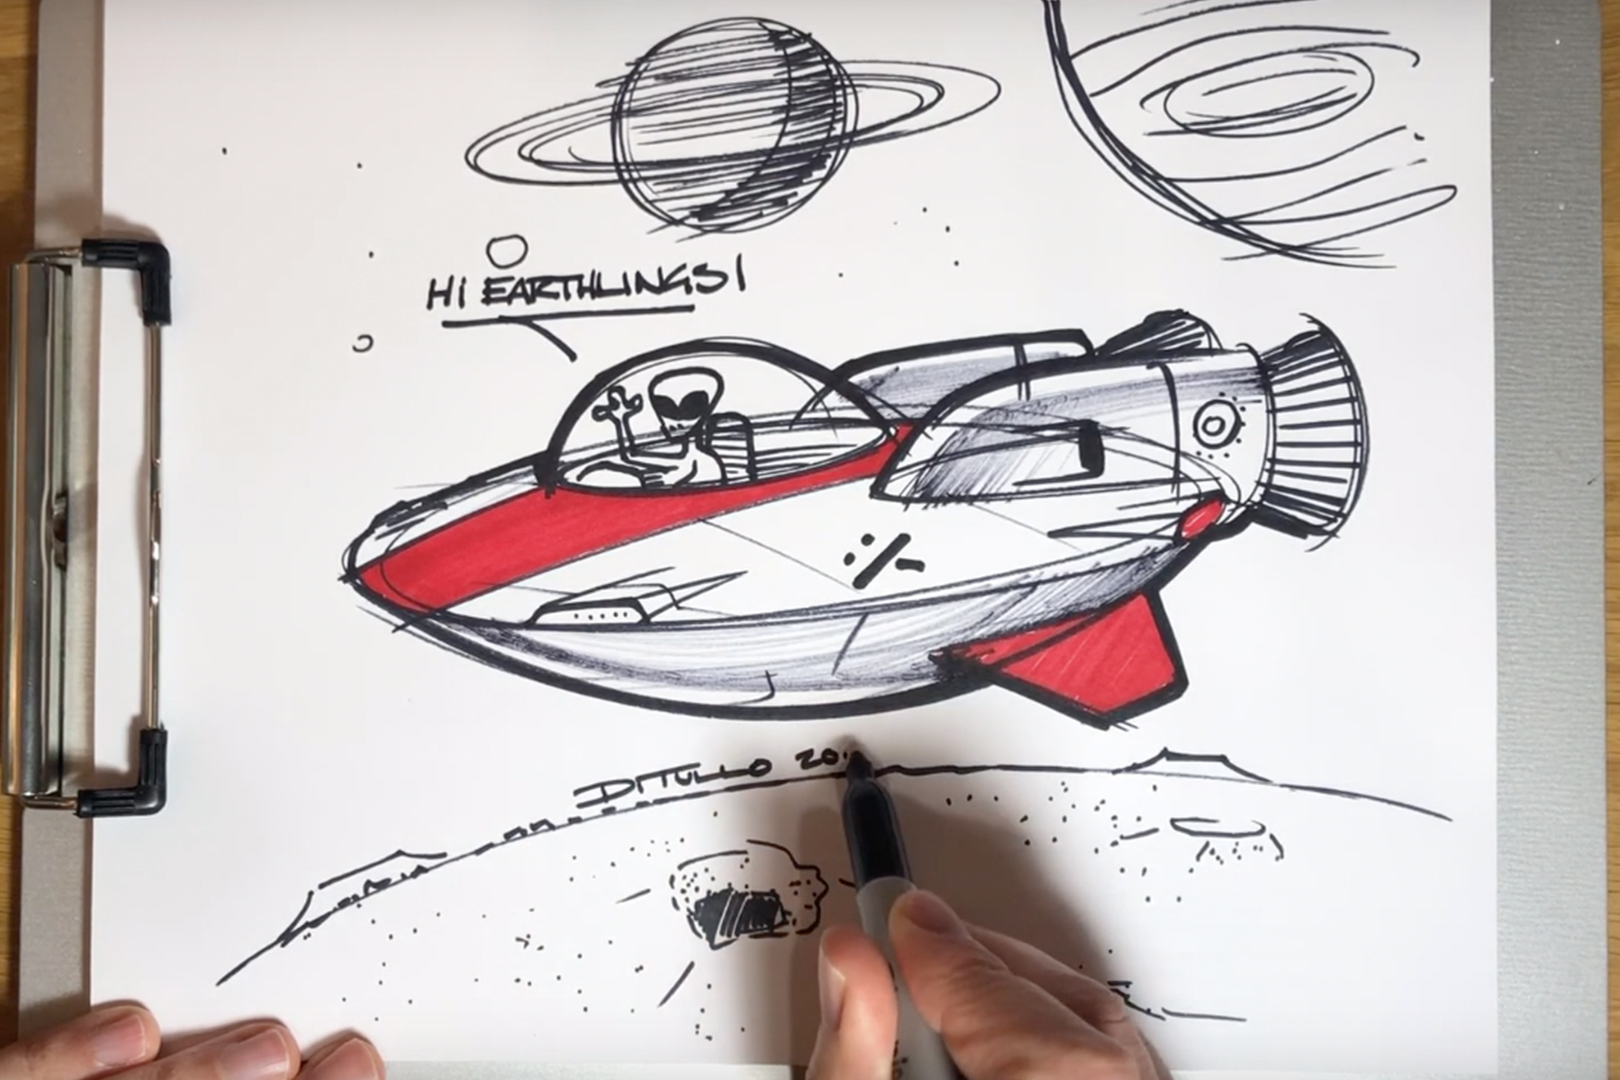 Michael DiTullo's final sketch of a flying saucer.